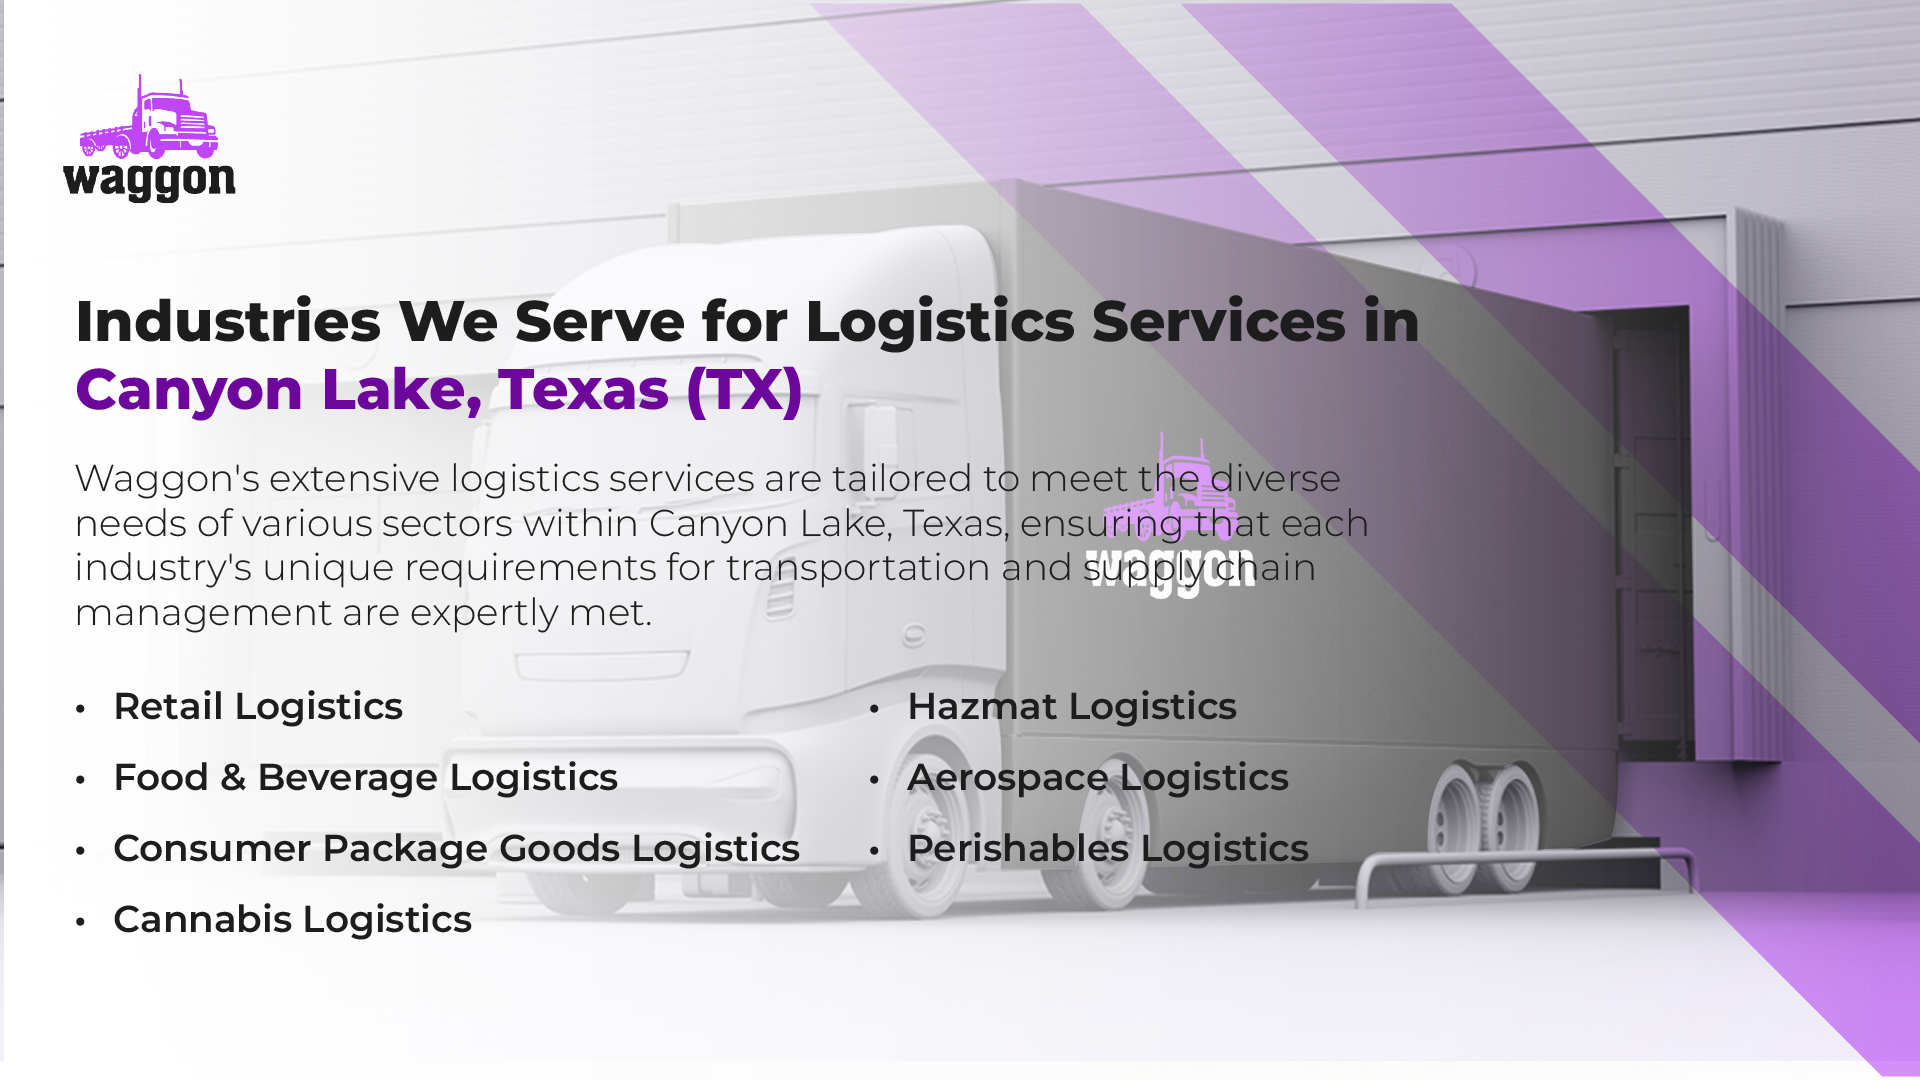 Industries We Serve for Logistics Services in Canyon Lake, Texas (TX)